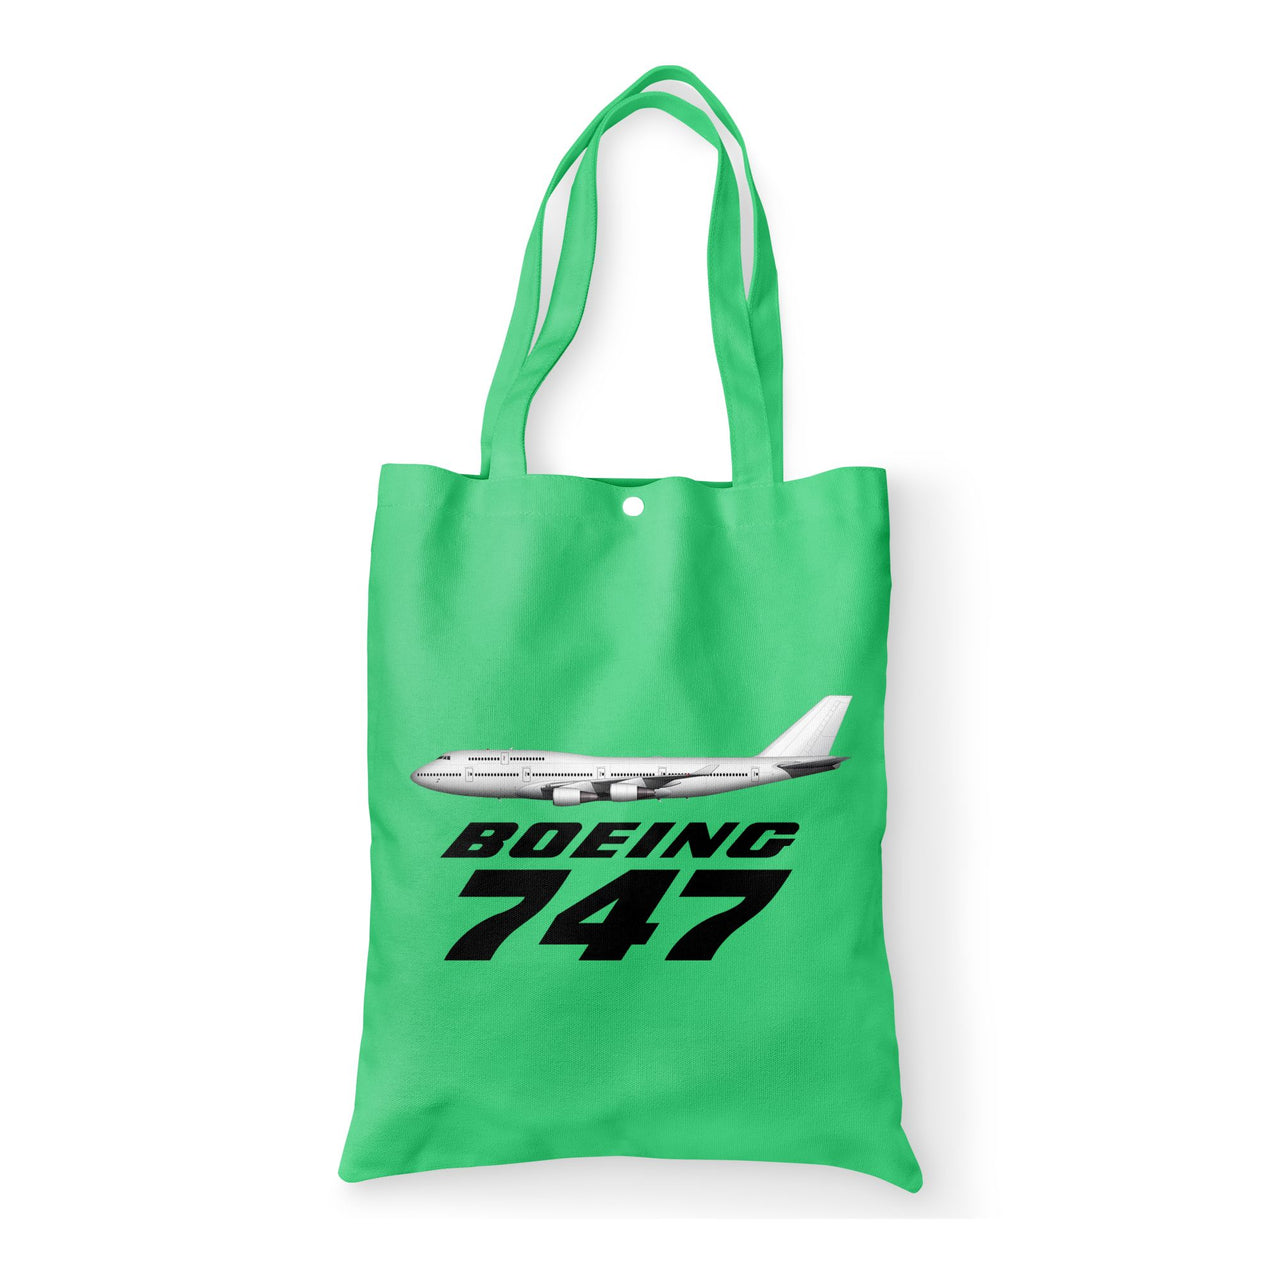 The Boeing 747 Designed Tote Bags